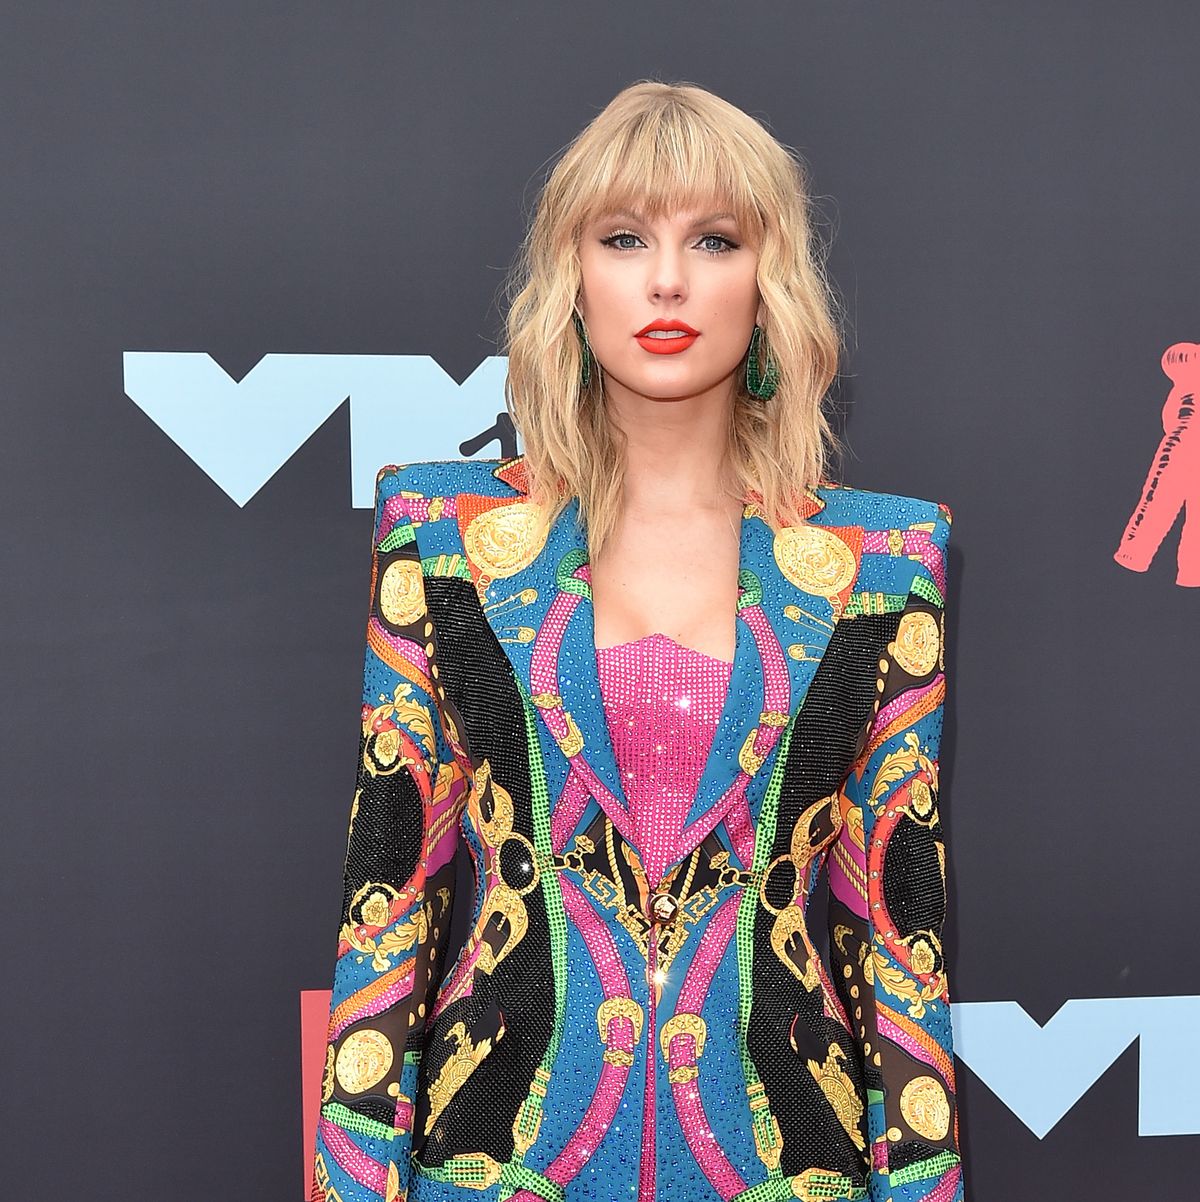 Man Arrested After Crashing Car Into Taylor Swift's NYC Building